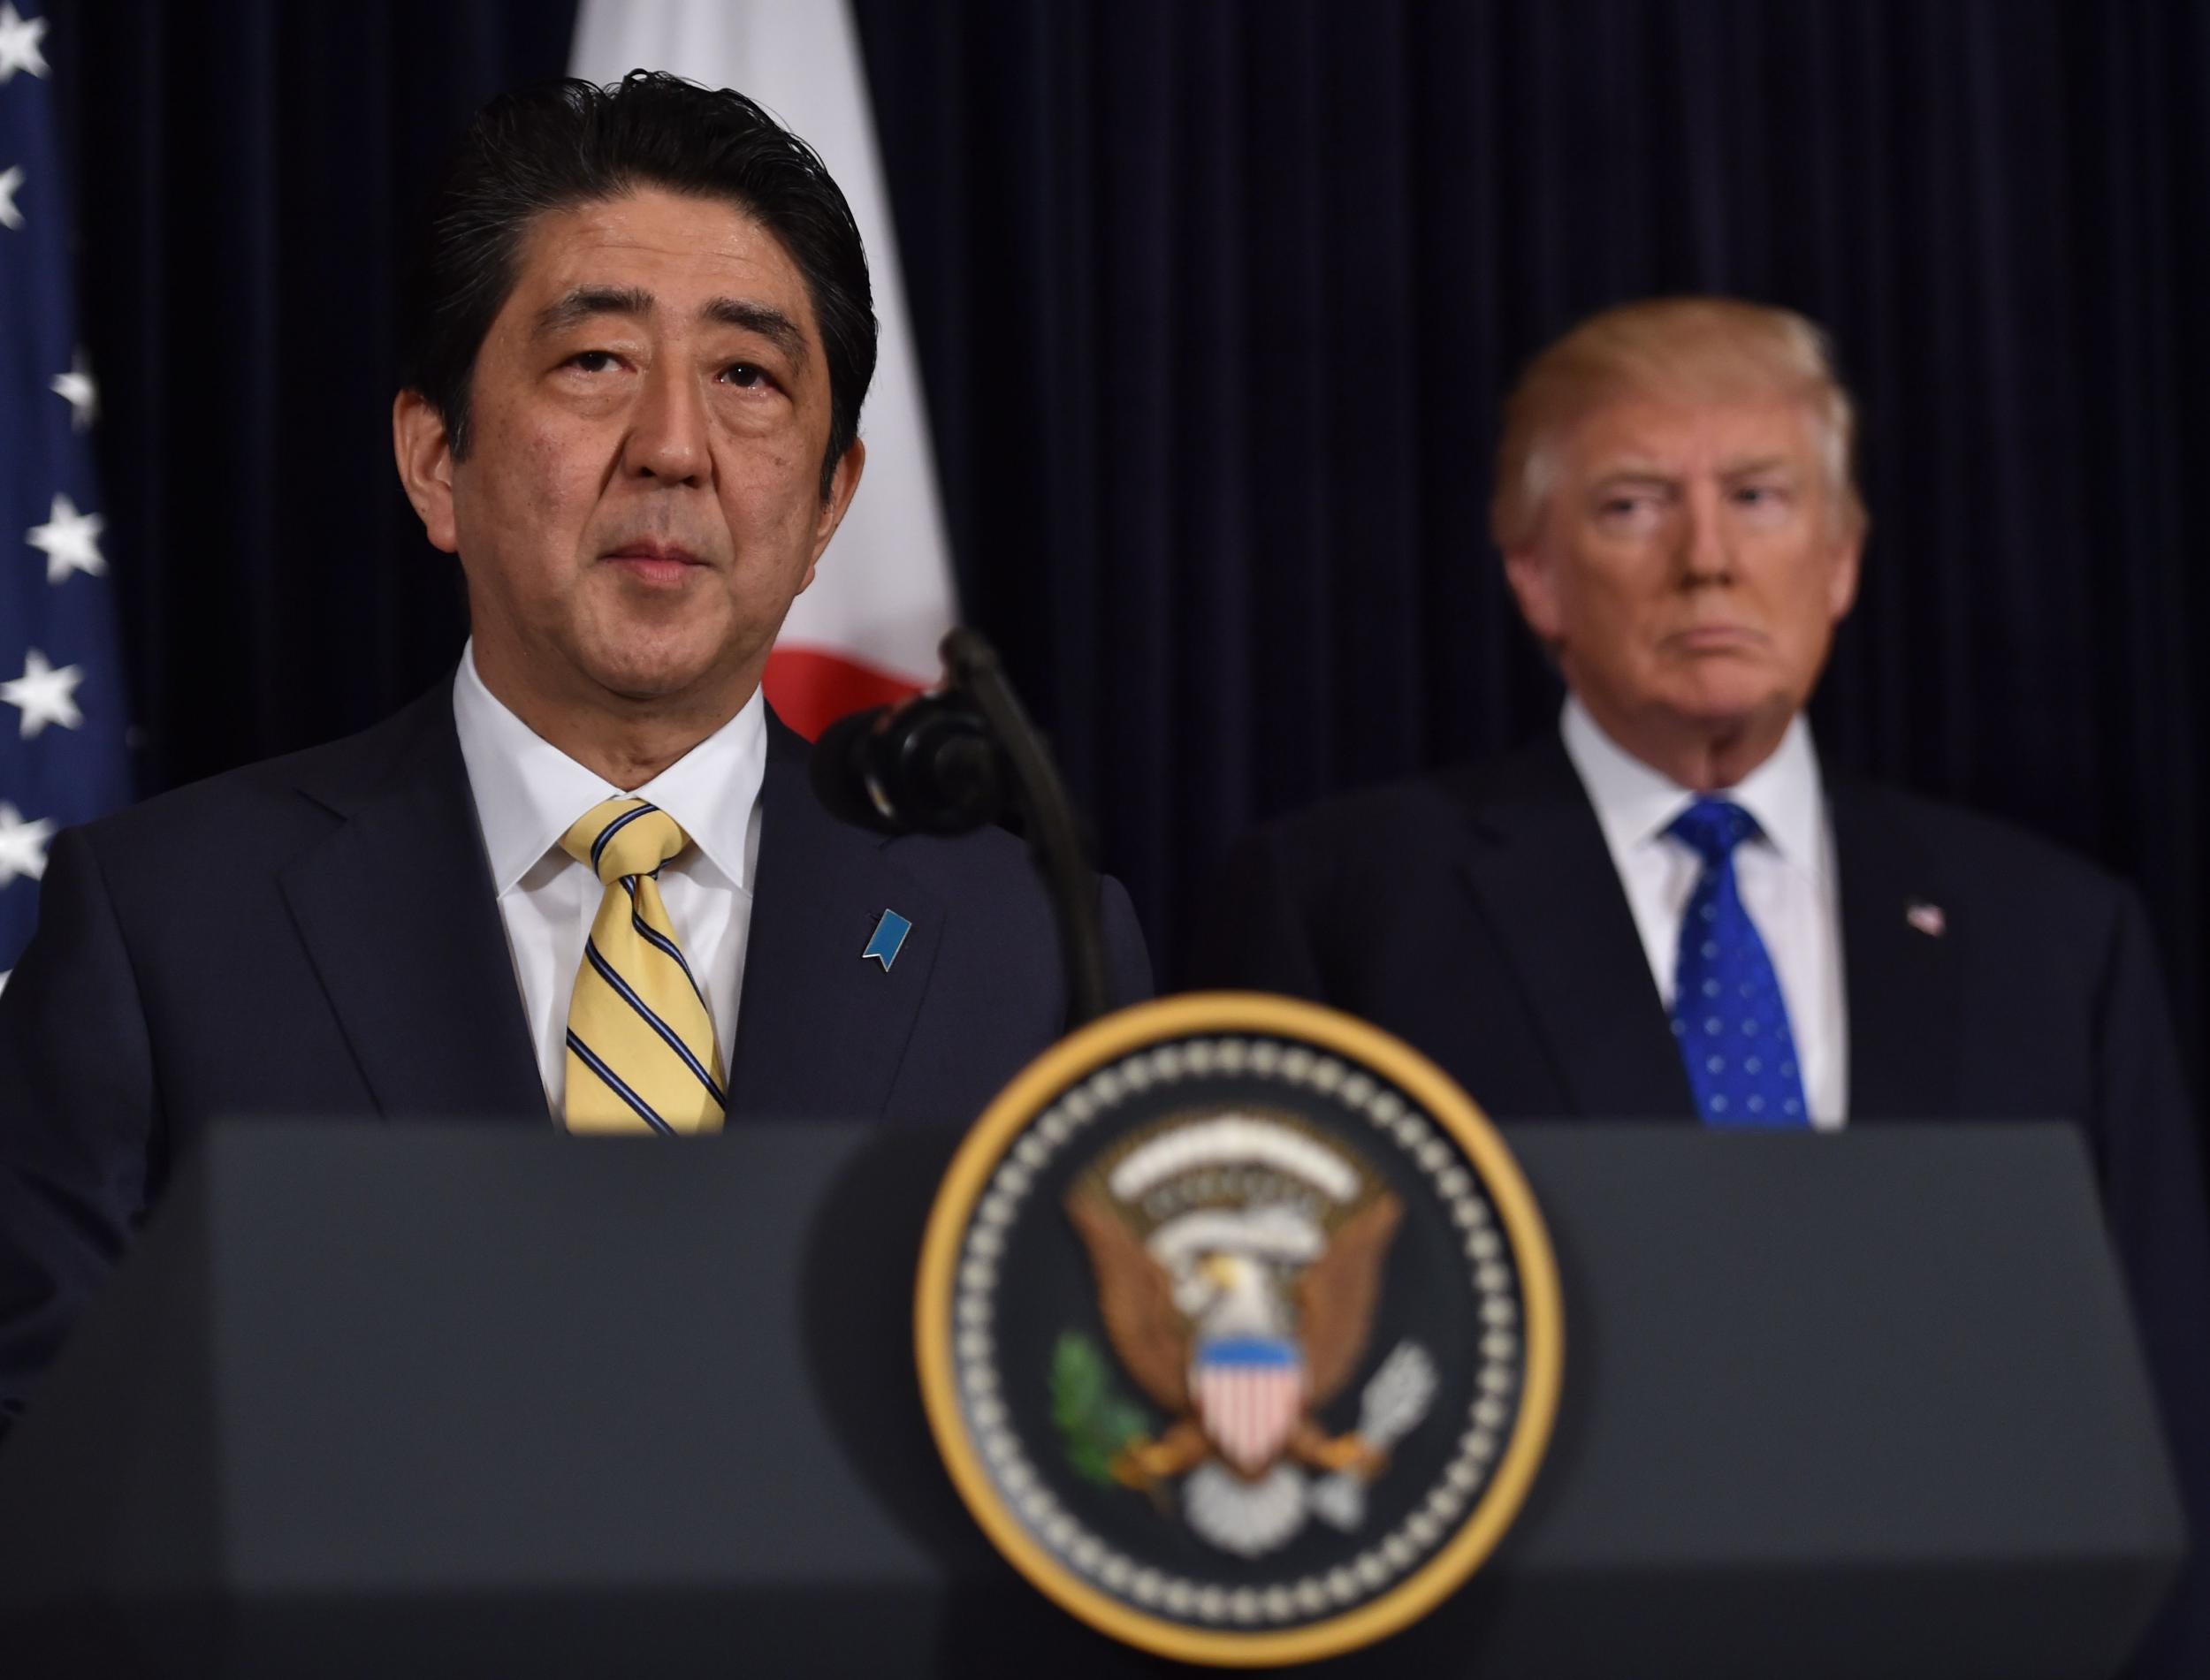 Japanese Prime Minister Shinzo Abe (L) and US President Donald Trump speak at Trump's Mar-a-Lago resort in Palm Beach, Florida, on February 11, 2017